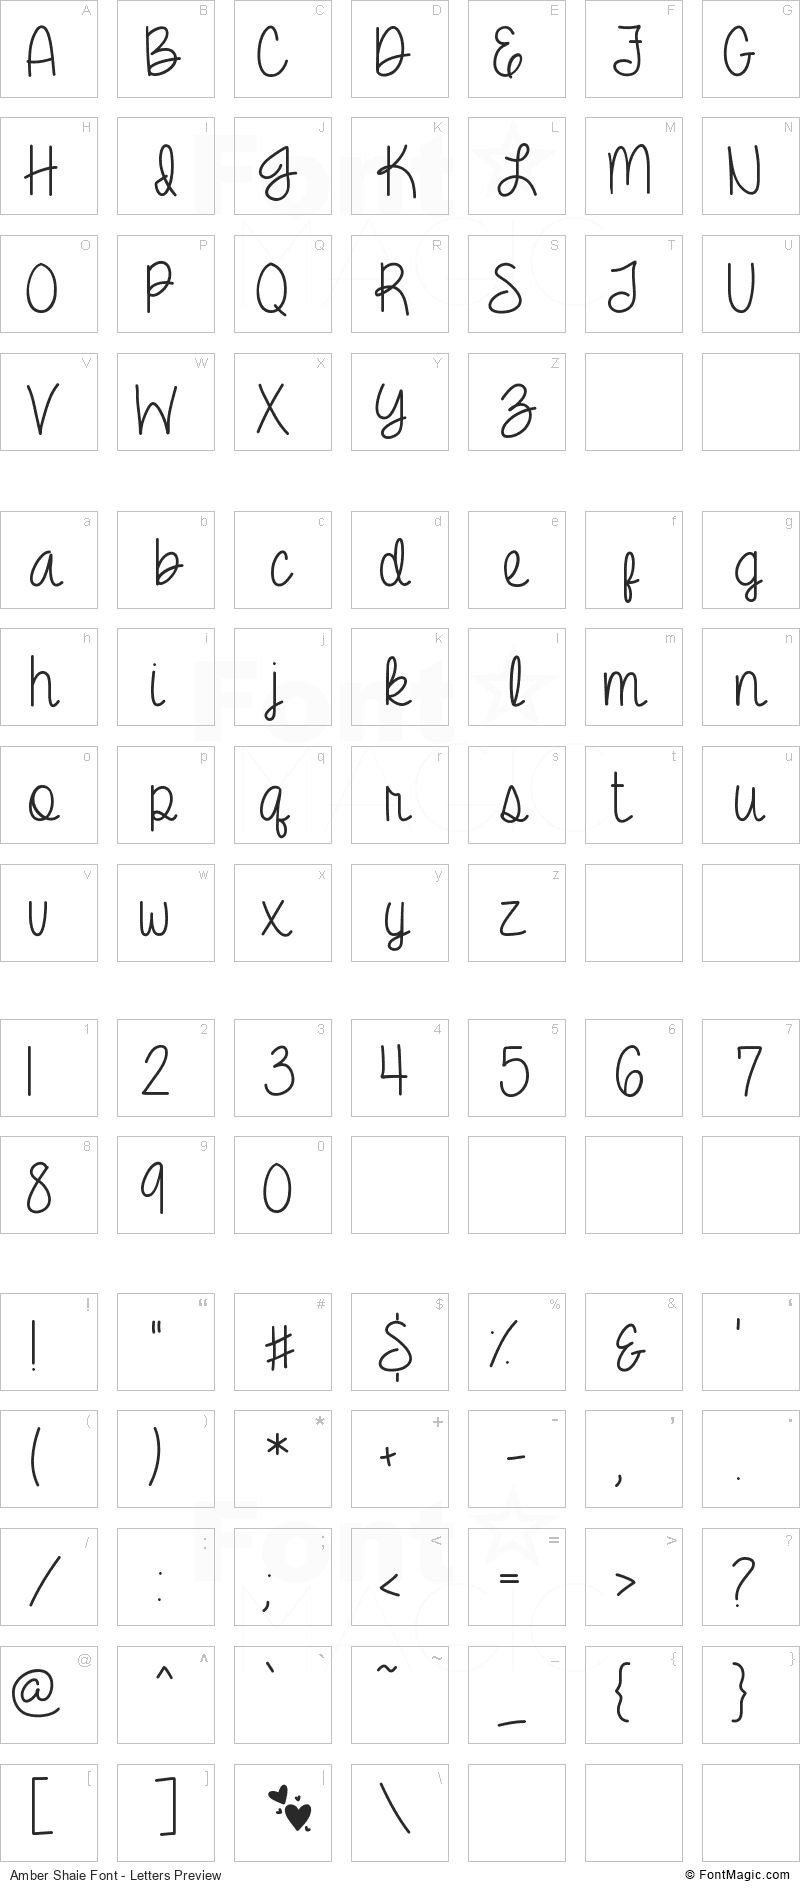 Amber Shaie Font - All Latters Preview Chart